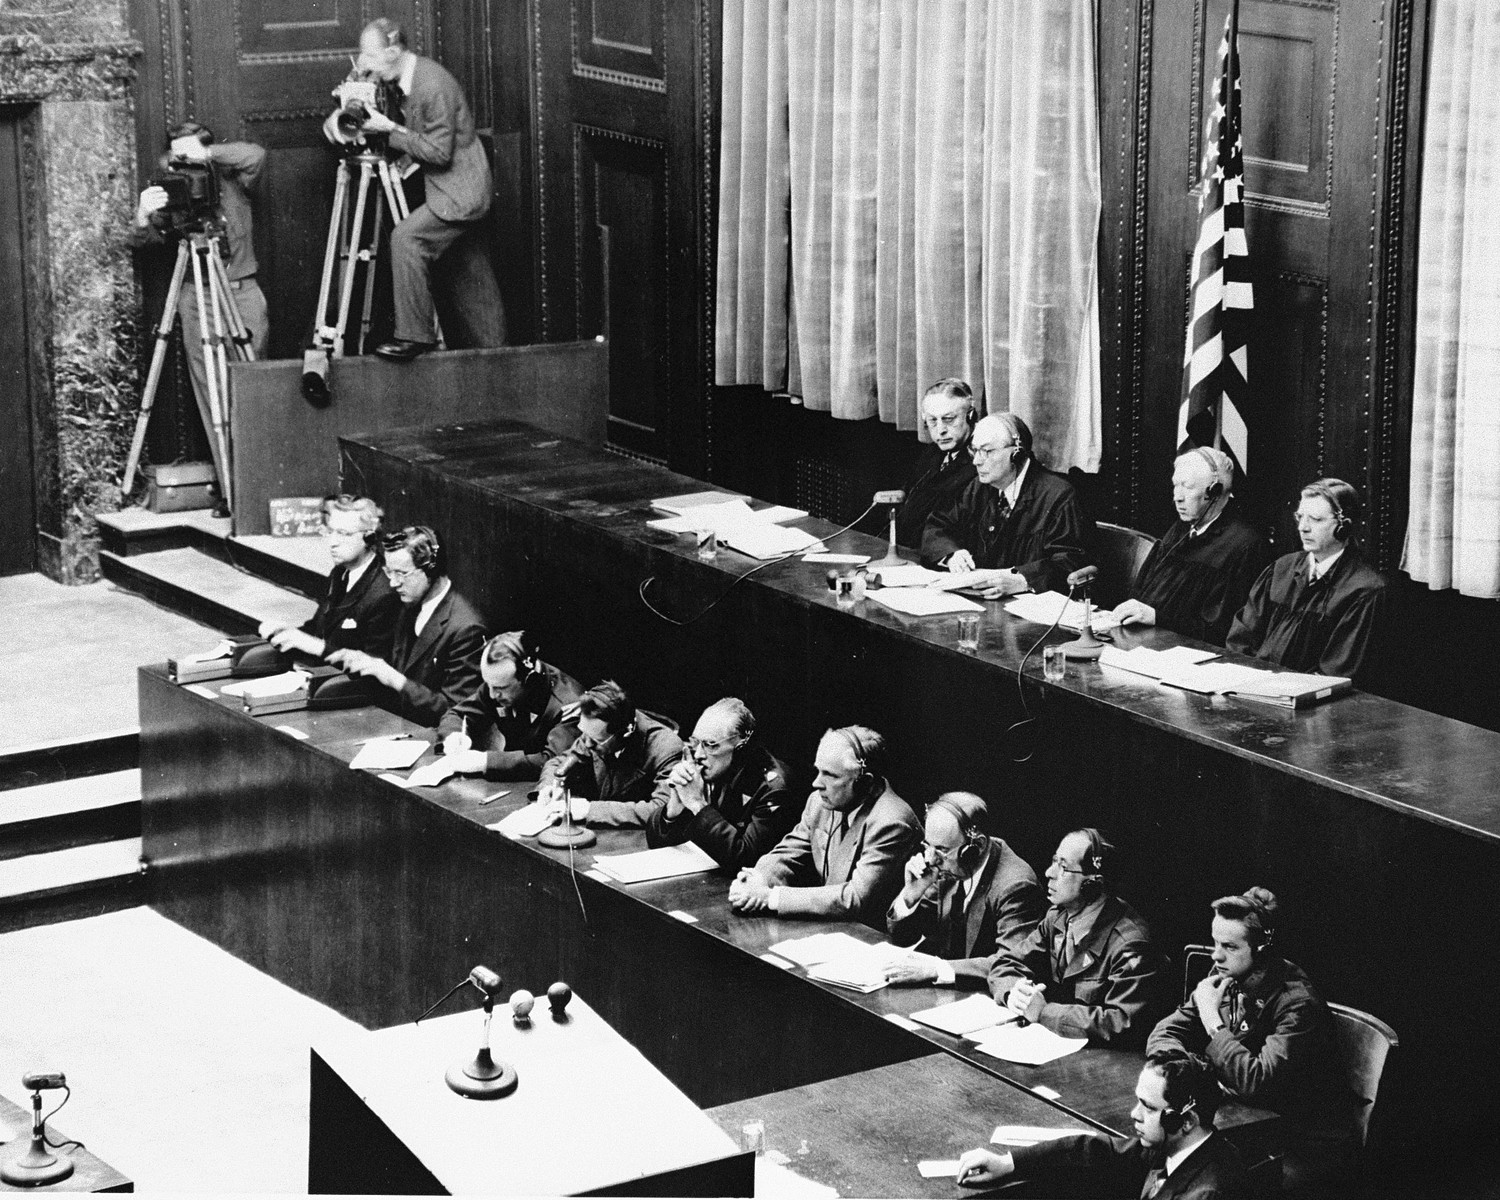 View of the tribunal during a session of the Medical Case (Doctors') Trial in Nuremberg.

In the foreground are the court reporters.